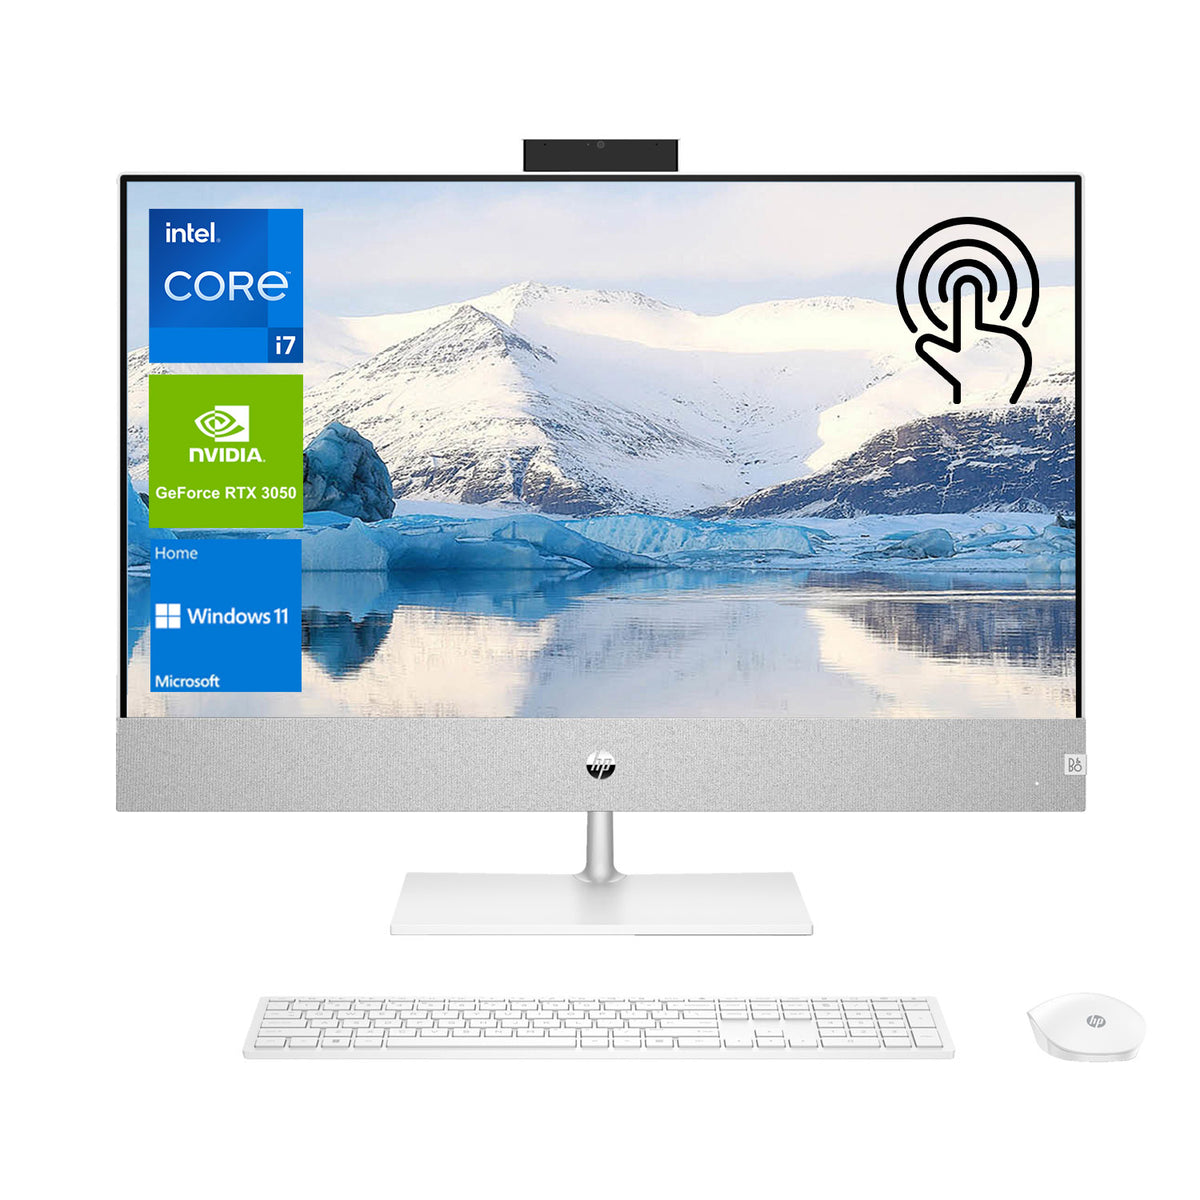 HP Pavilion 27-ca2000 All-in-One, 27" FHD 1920 * 1080 Touchscreen 60Hz, Intel Core i7-13700T, NVIDIA GeForce RTX 3050, 8GB DDR4 SODIMM RAM, 512GB PCIe M.2 SSD, Wi-Fi 6, Windows 11 Home, White